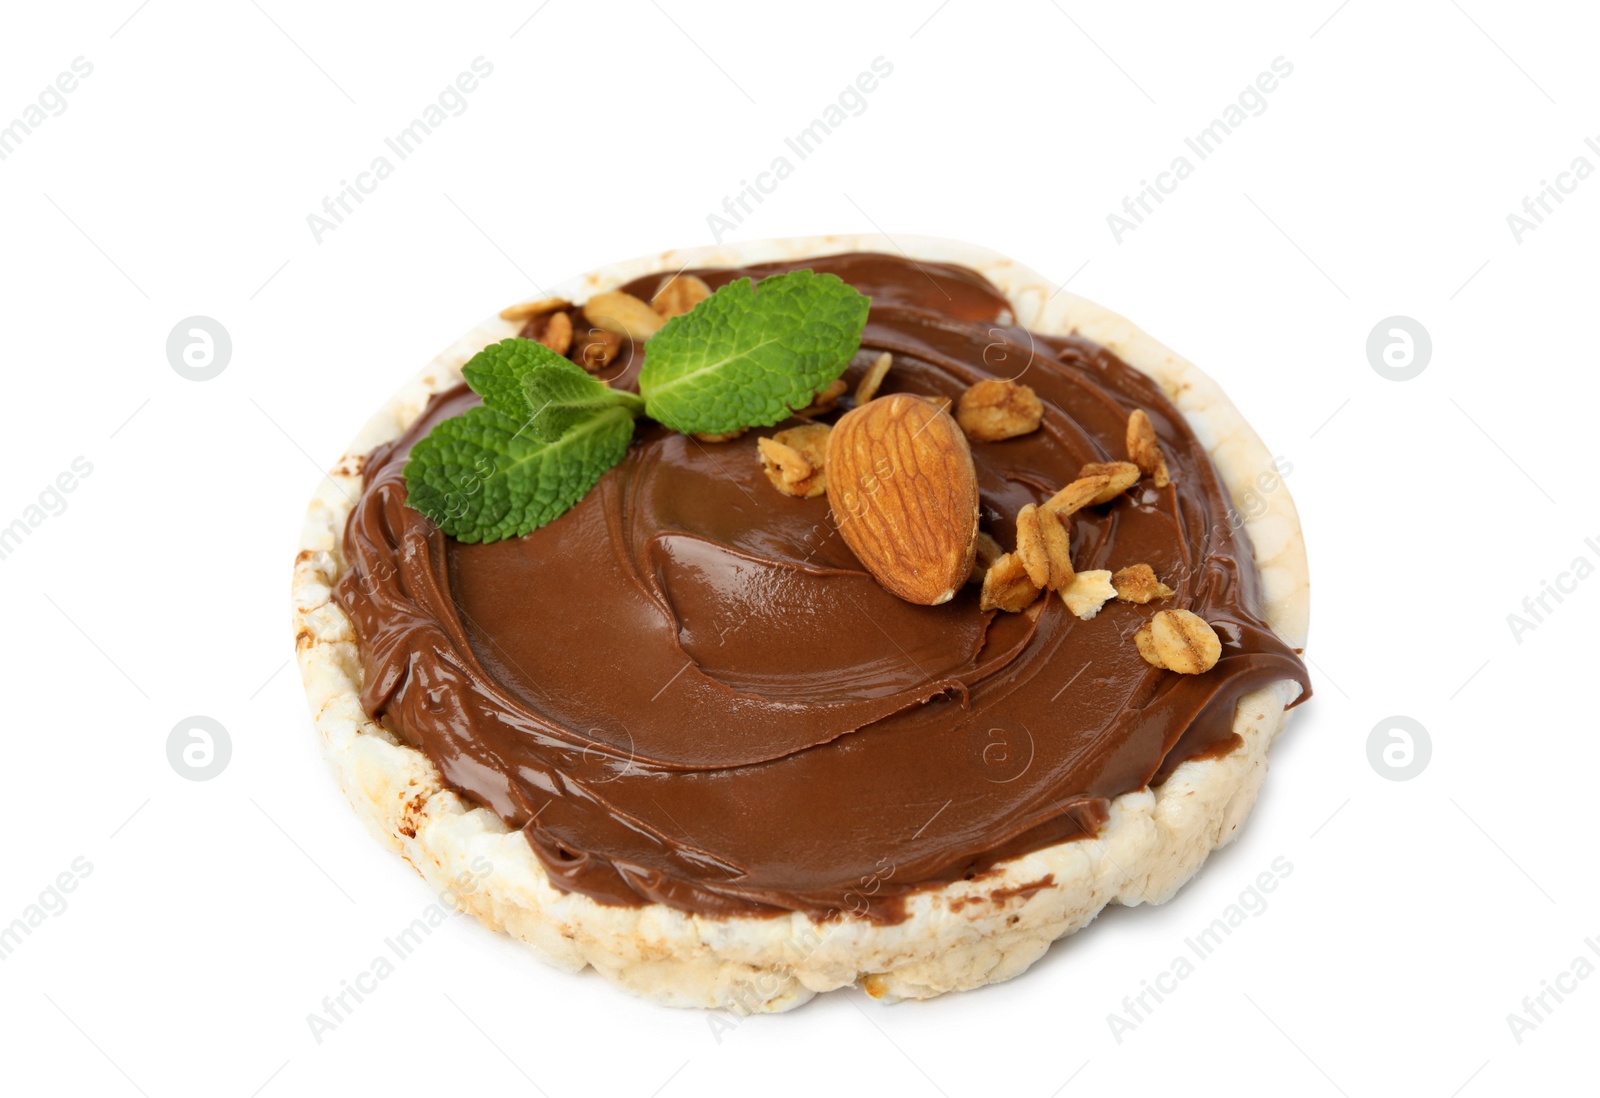 Photo of Puffed rice cake with chocolate spread, nuts and mint isolated on white